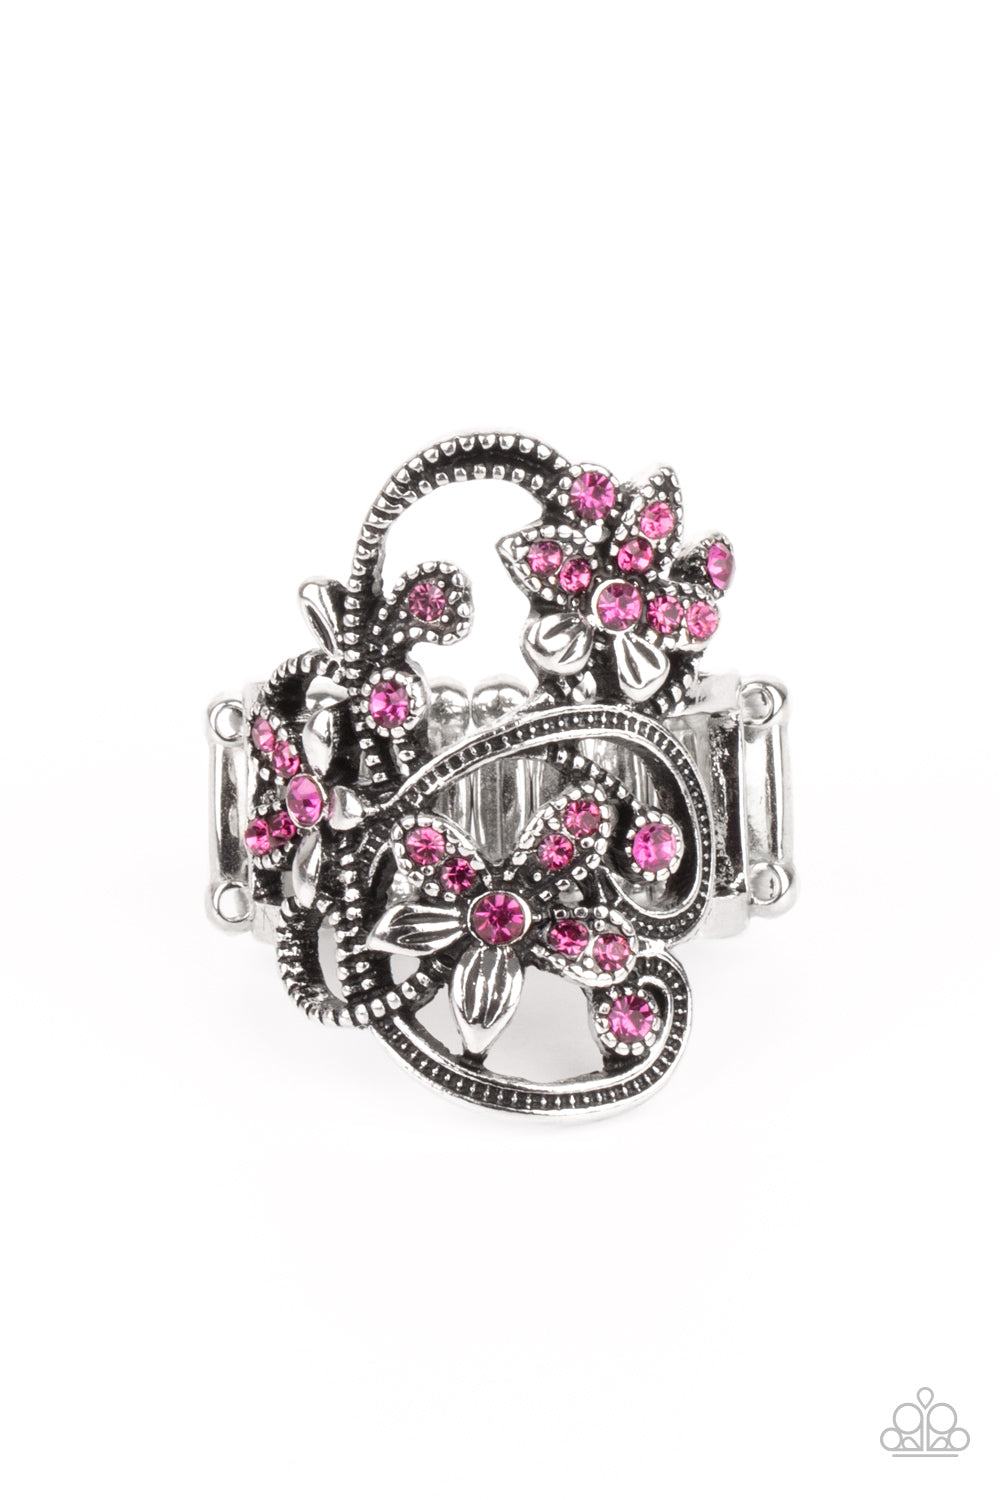 Bouquet Toss Pink Ring - Paparazzi Accessories  Dotted with dainty pink rhinestone centers, antiqued silver floral frames bloom across a studded backdrop for a sparkly seasonal look. Features a stretchy band for a flexible fit.  All Paparazzi Accessories are lead free and nickel free!  Sold as one individual ring.